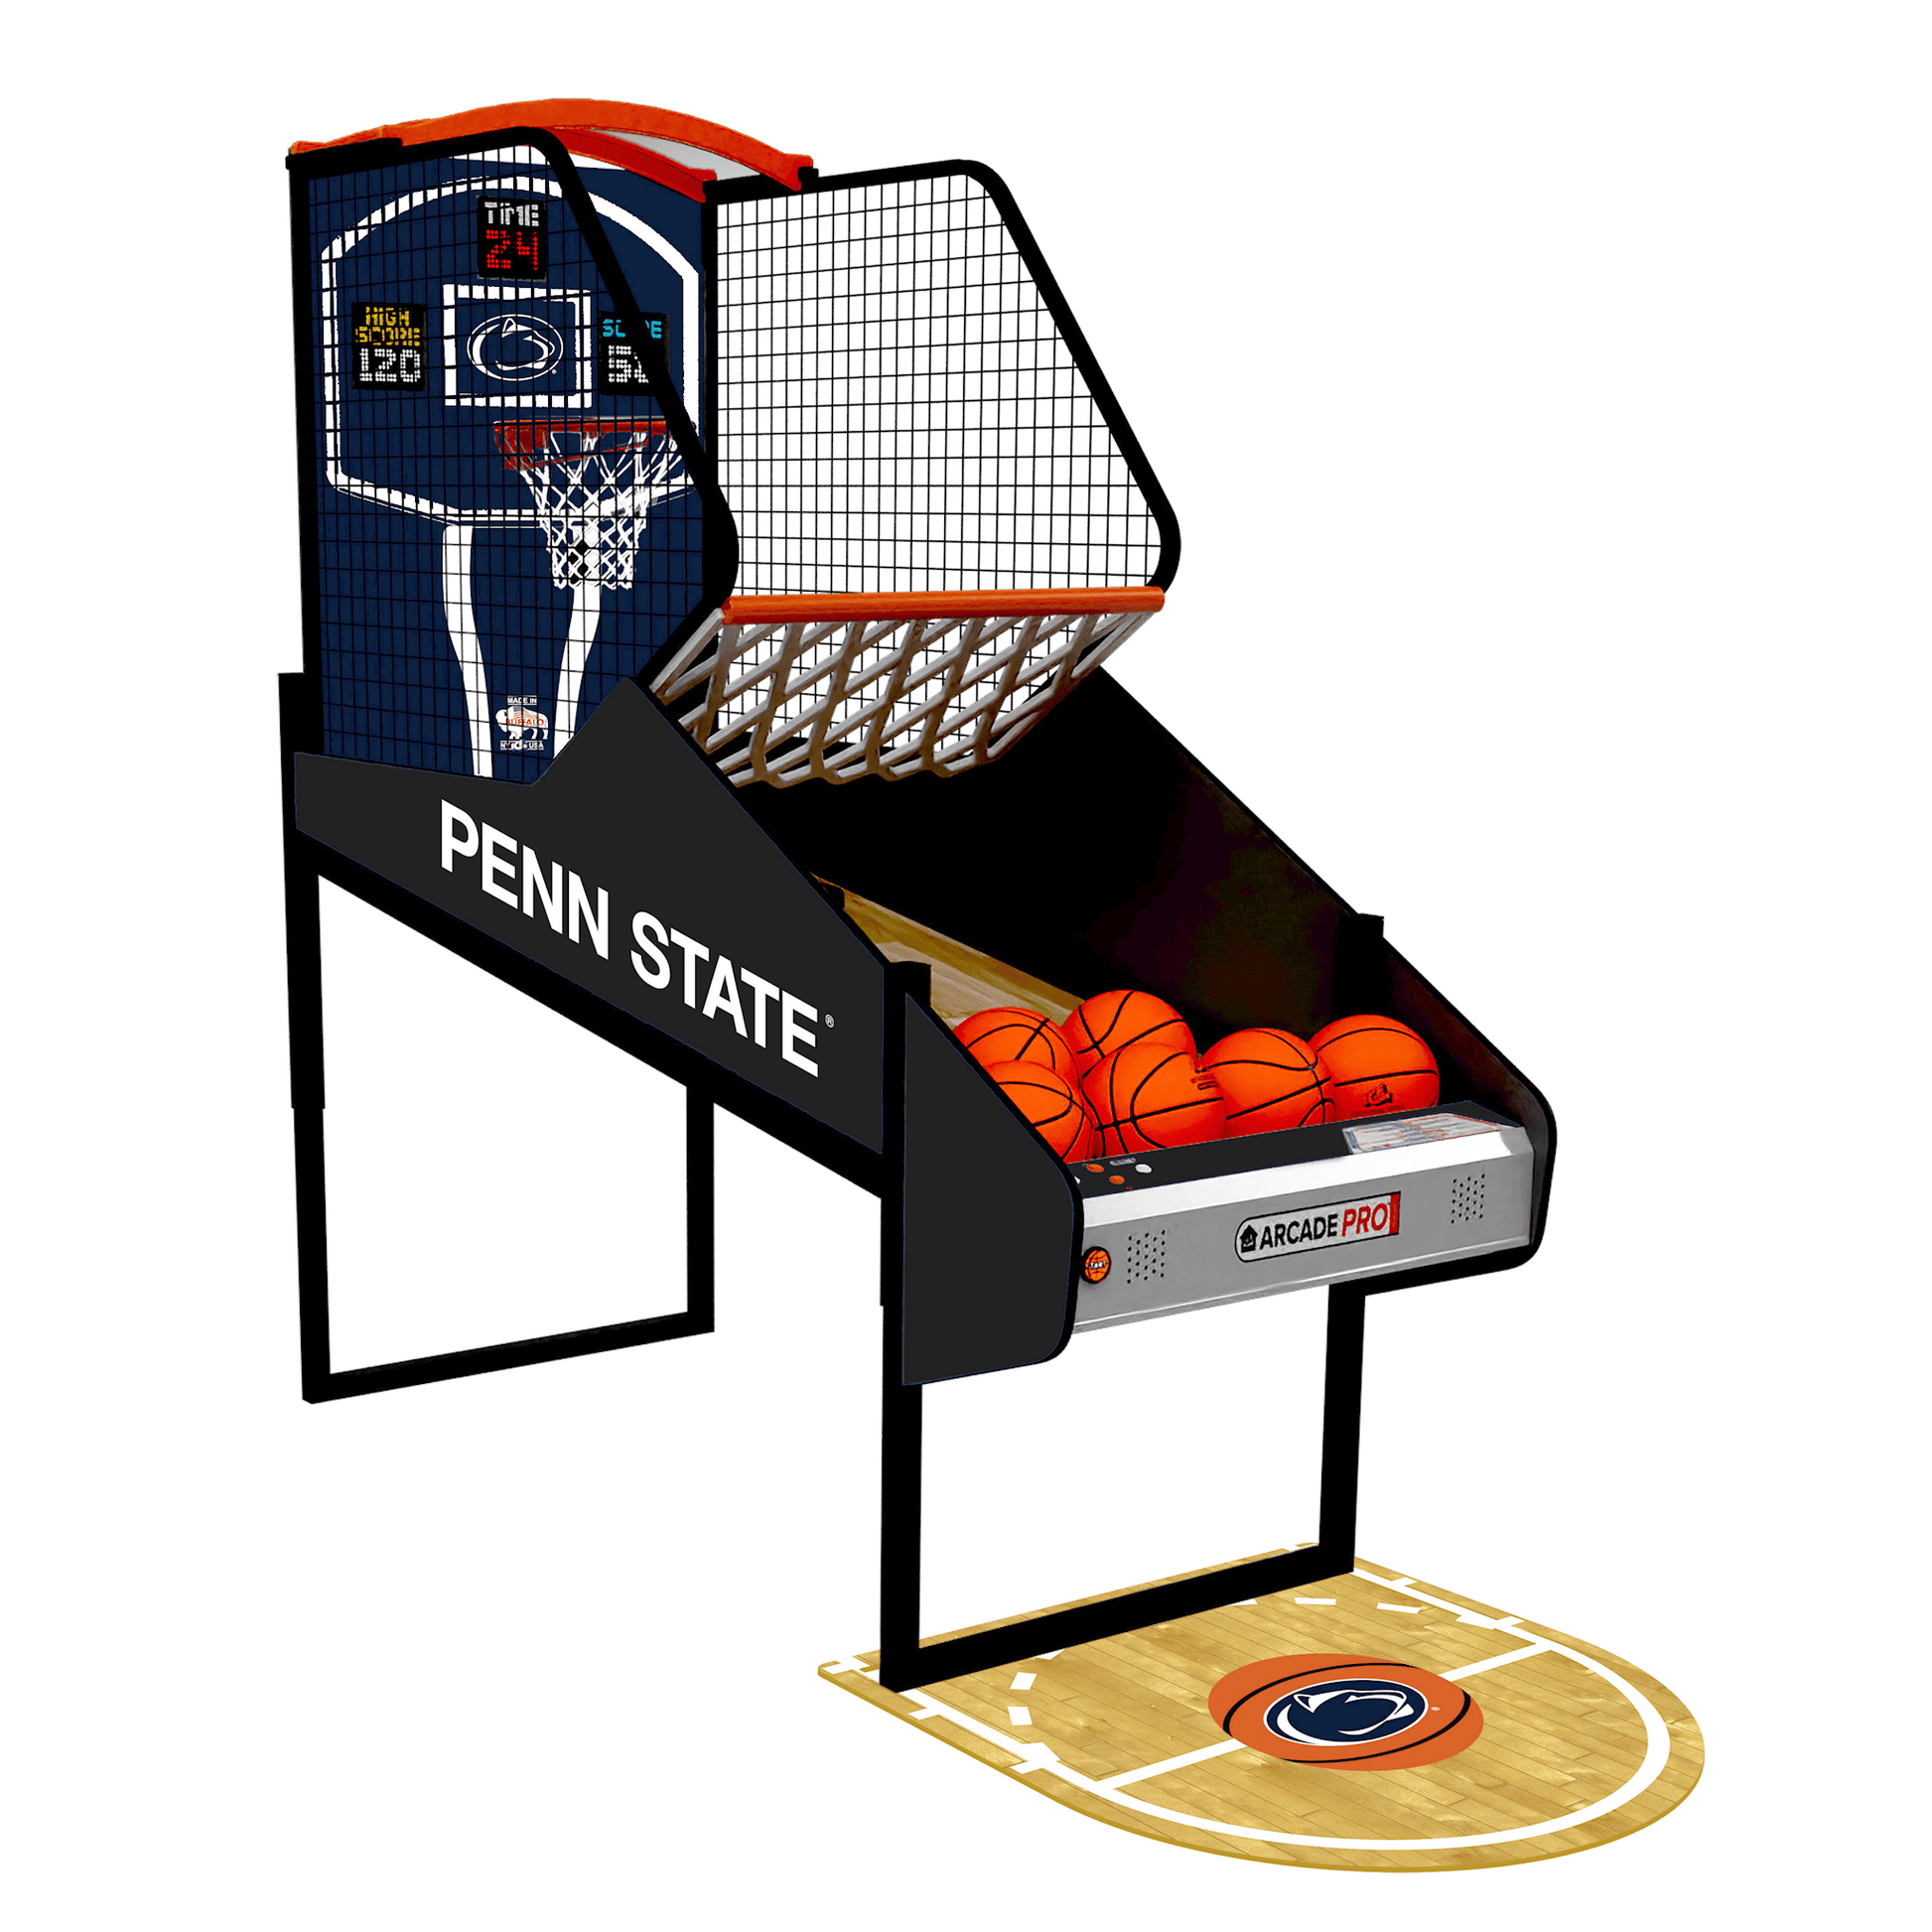 Penn State College Hoops Arcade Innovative Concepts in Entertainment   